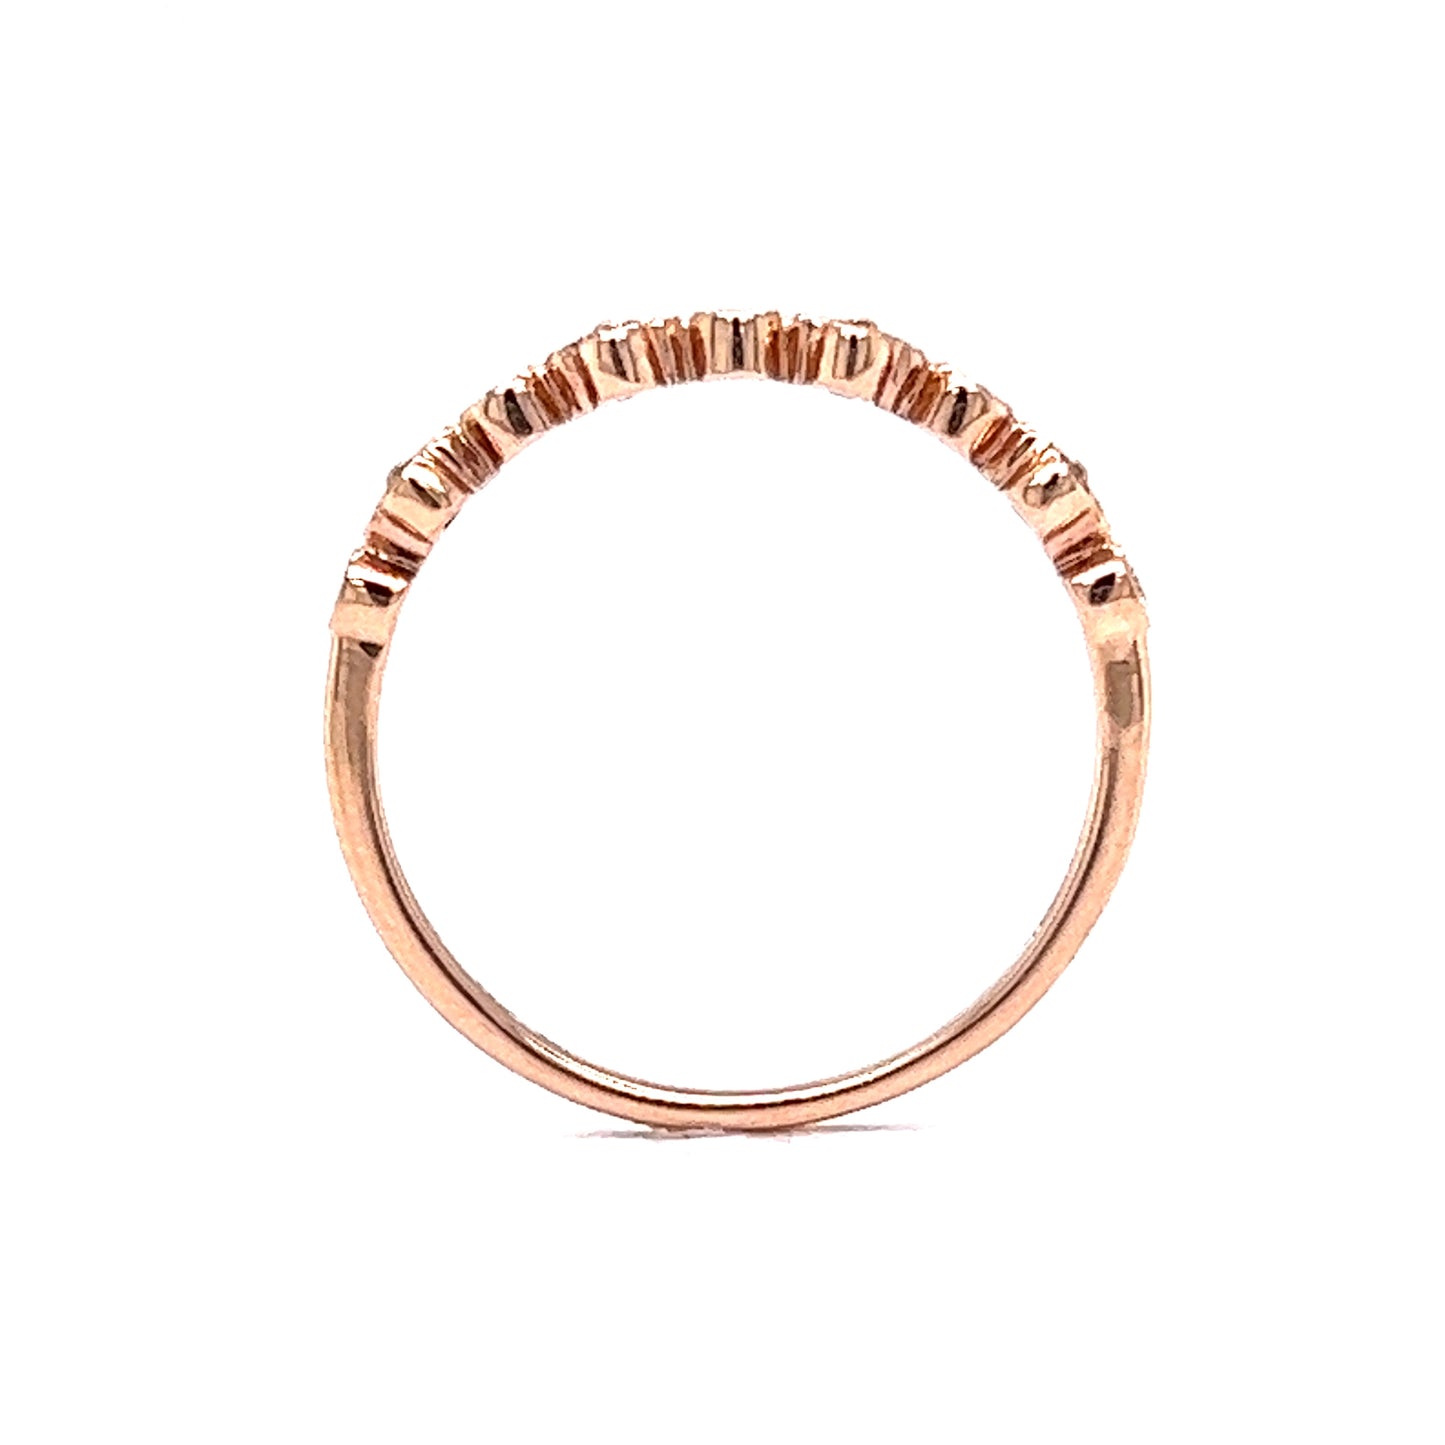 Wedding Band w/ .16 Carats of Diamonds in 14k Rose Gold